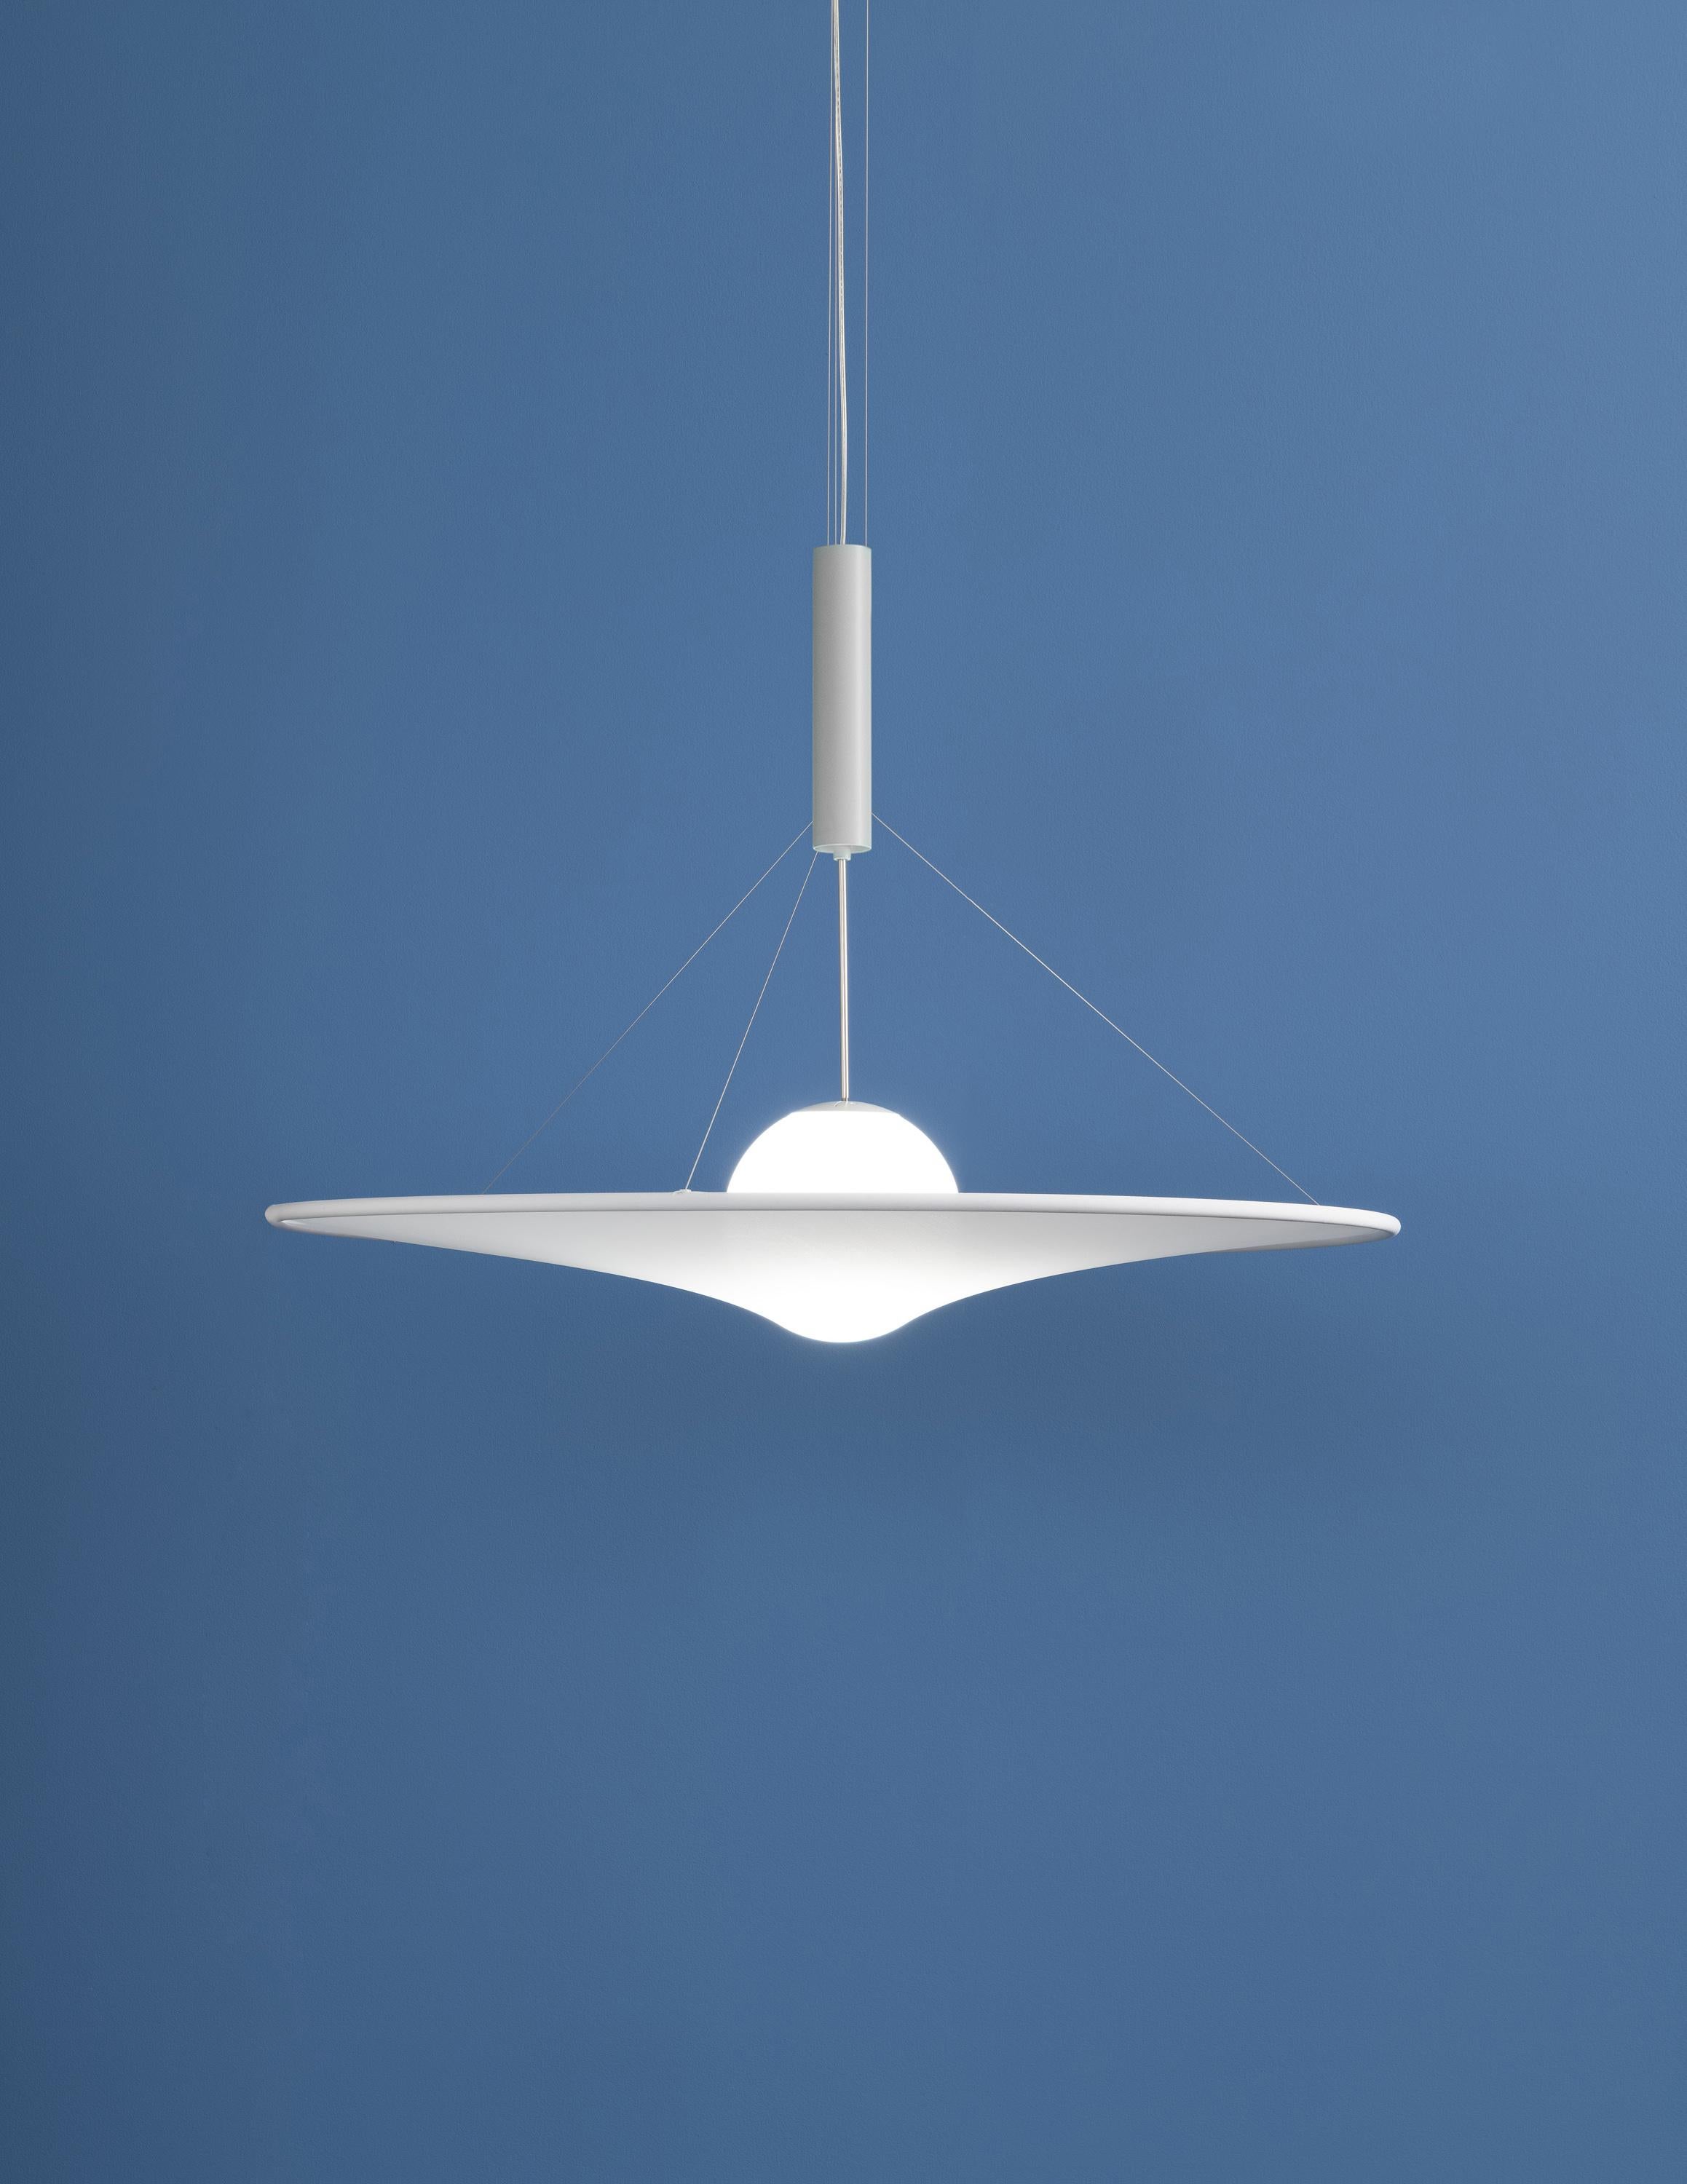 Axolight Manto Extra Large Pendant Light in White Fabric and Grey Finish by Davide Besozzi

Manto expresses its true personality in the reciprocal movement of simple geometries. Thanks to its artisan knowledge and dynamic nature, it changes shape